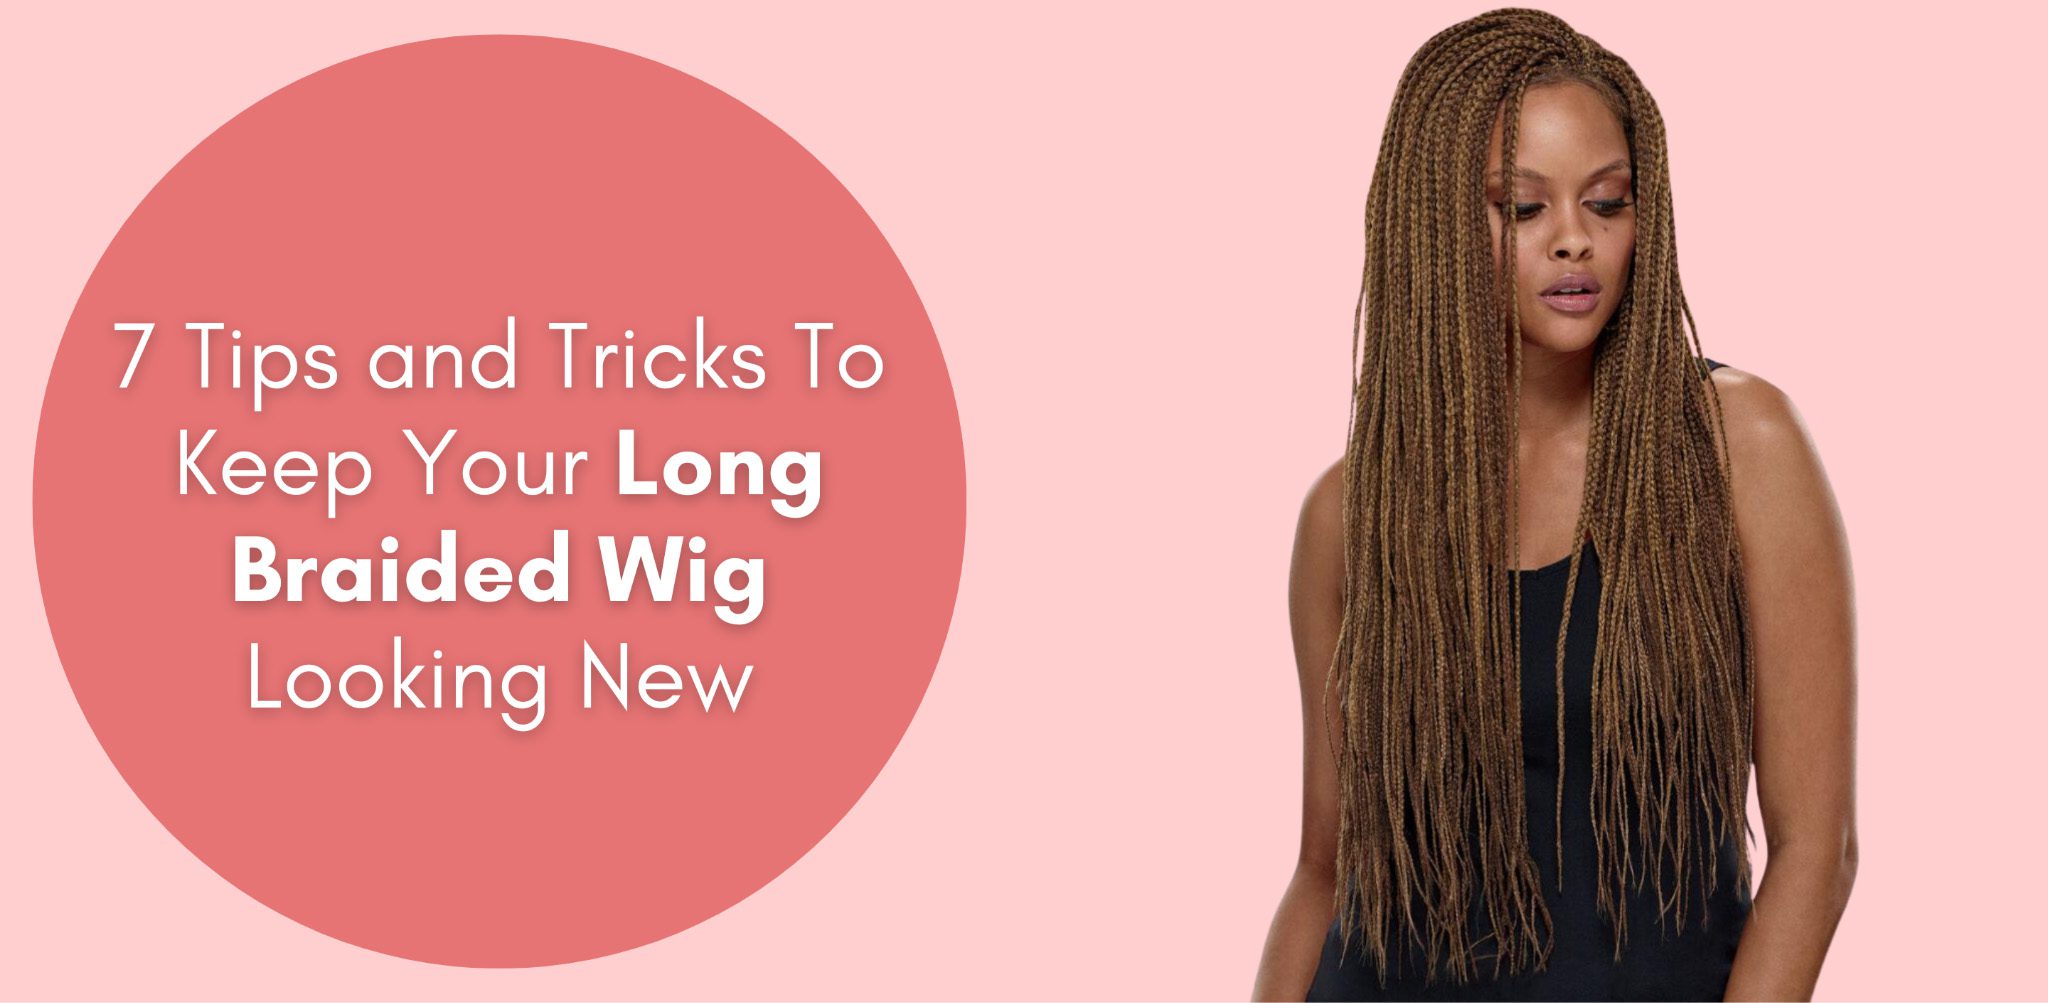 7 tips and tricks to keep your long braided